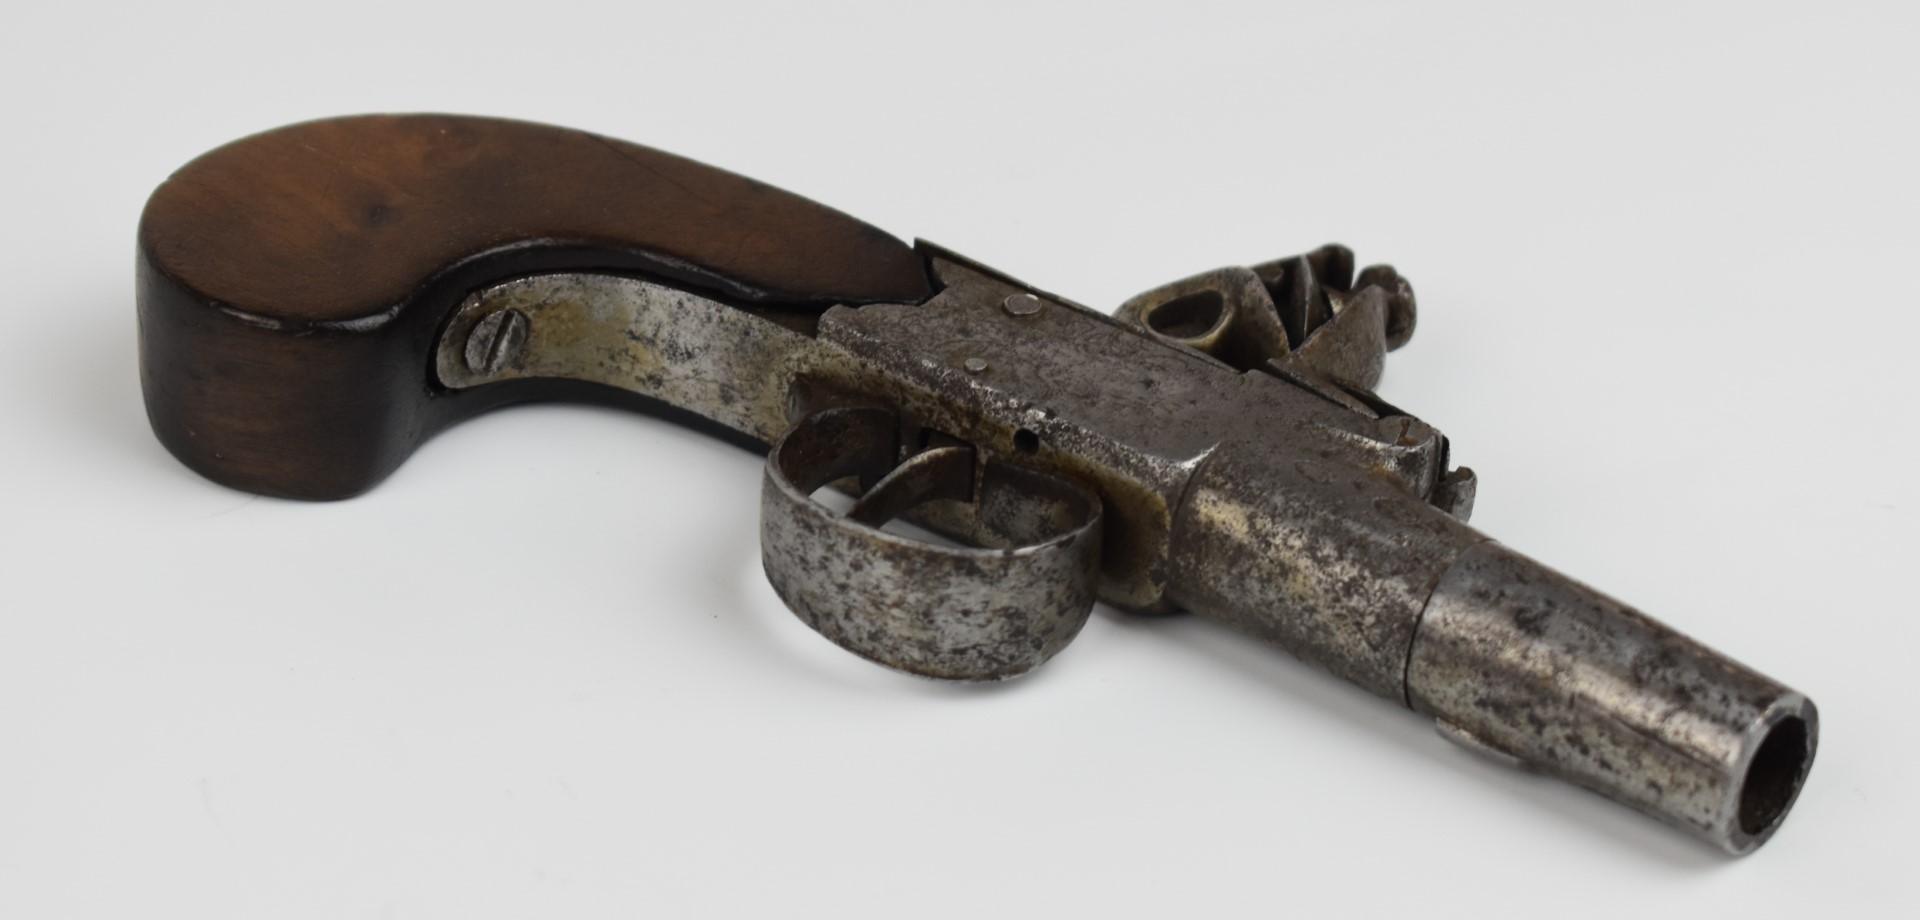 Indistinctly named flintlock pocket pistol with engraved lock and hammer, vacant shield shaped - Image 4 of 11